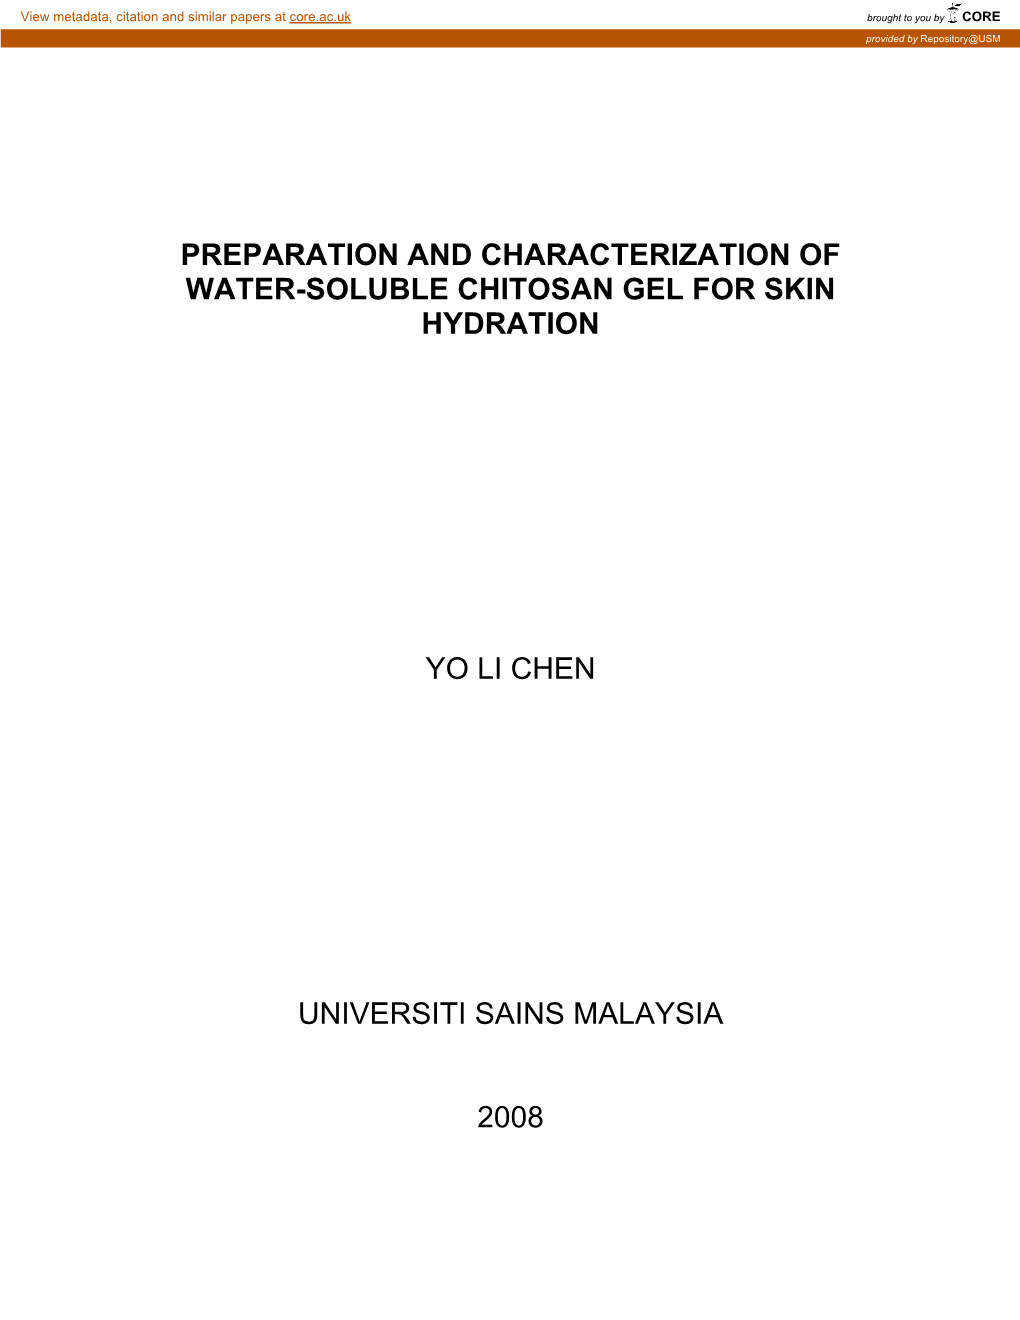 Preparation and Characterization of Water-Soluble Chitosan Gel for Skin Hydration